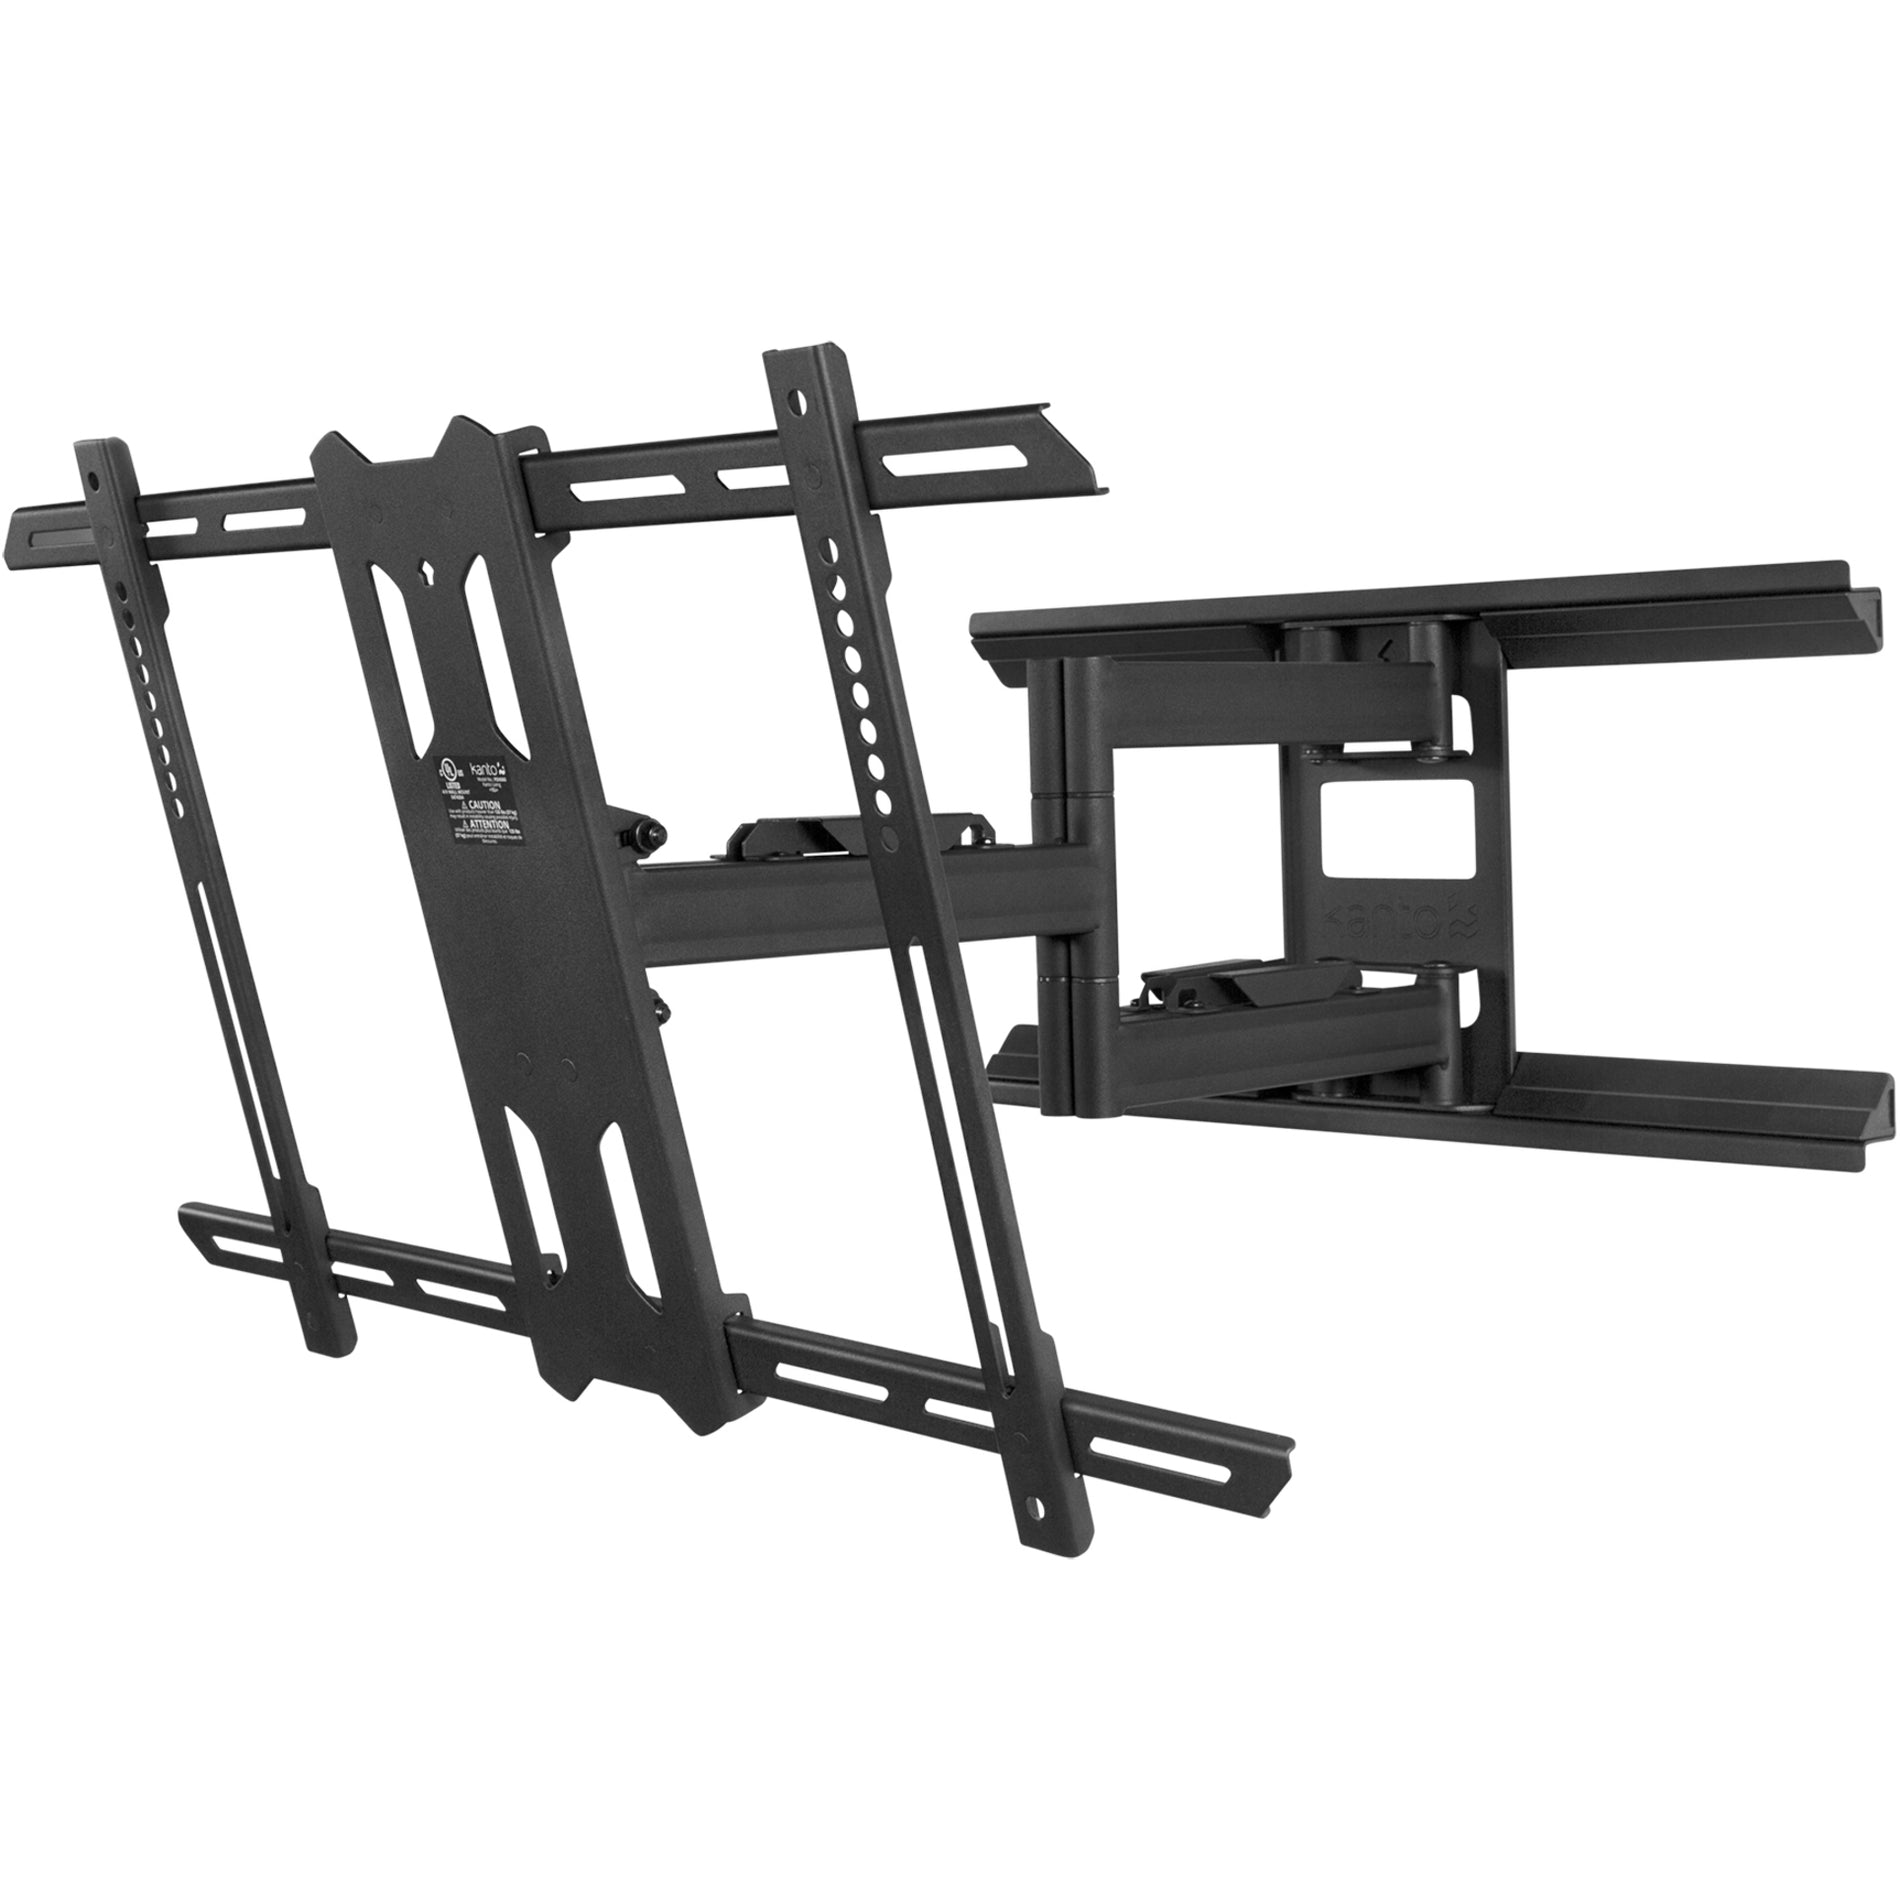 Kanto PDX650 Wall Mount for TV - Black